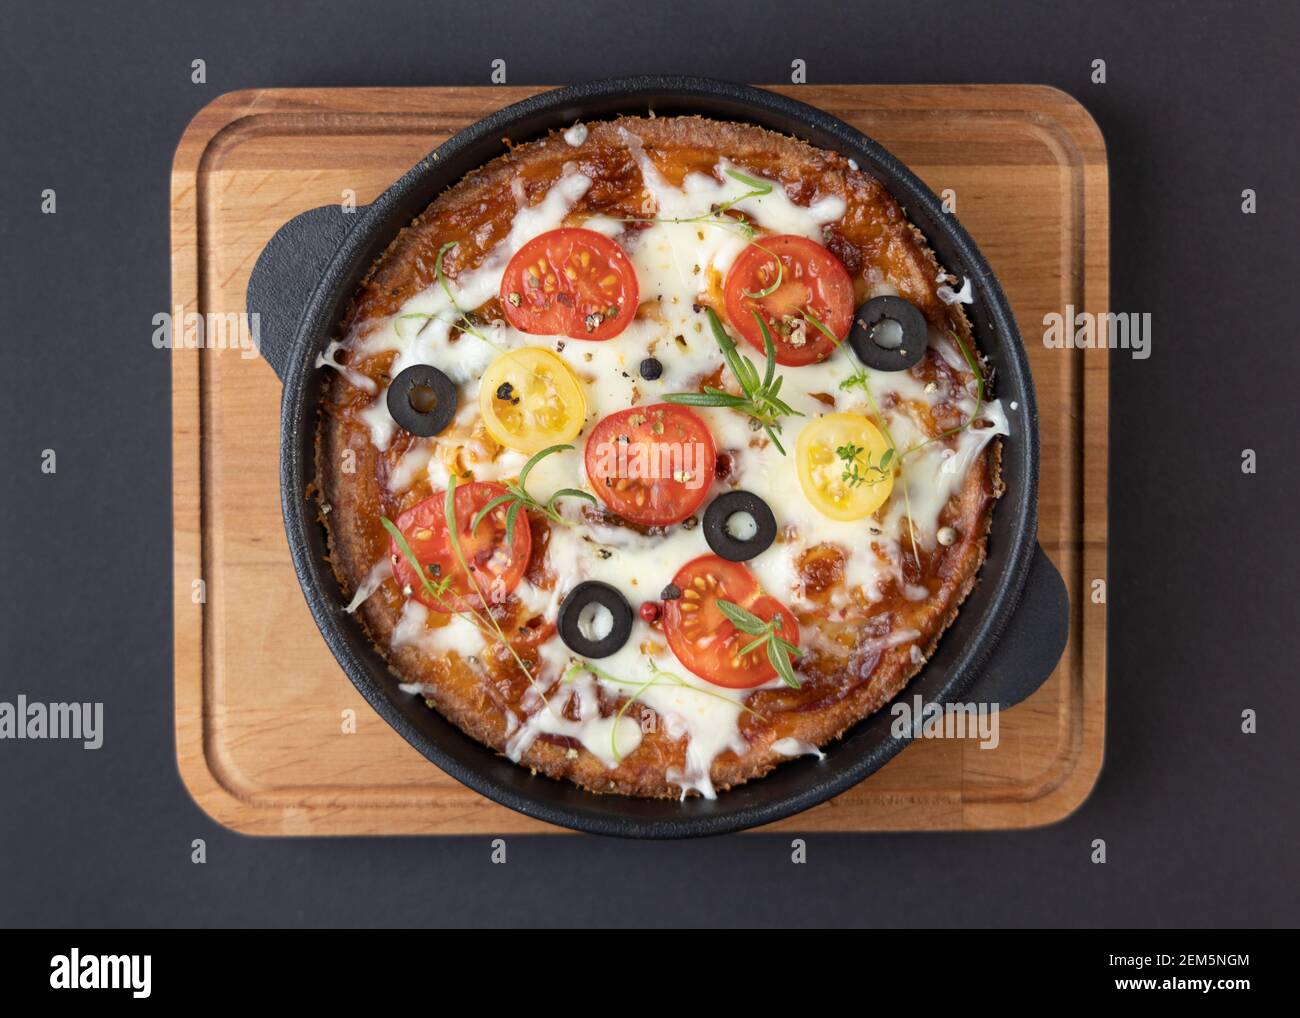 Low-carb keto diet Pizza with mozzarella and tomato crust with cheese filling. Low carb keto diet cake made from almond flour and mozzarella instead Stock Photo